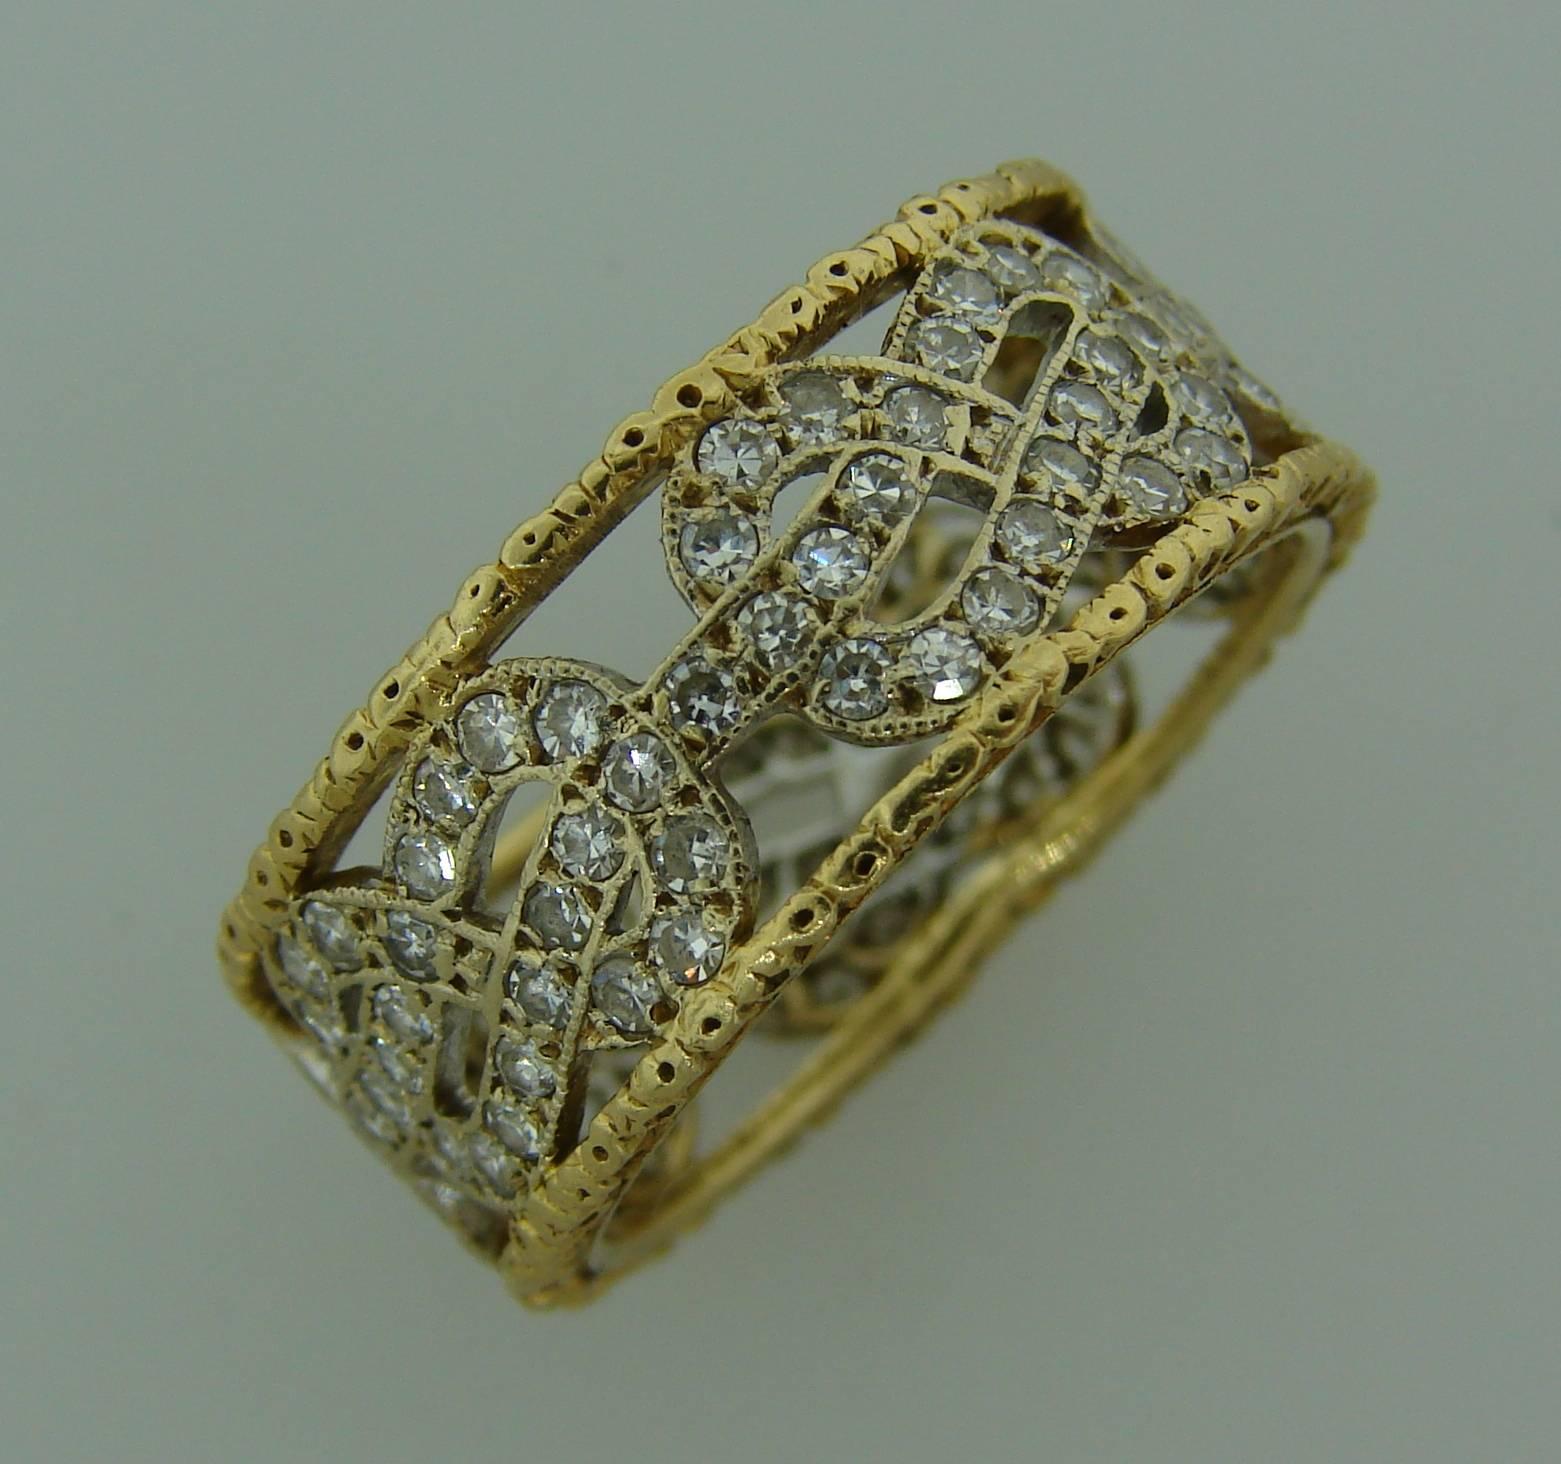 Lovely signature Buccellati band ring created by Mario Buccellati in the 1950's.
The ring is made of 18 karat (stamped) yellow and white gold and encrusted with single cut diamonds.
Size 6.25. Weight 4.6 grams.
The band is 5/16